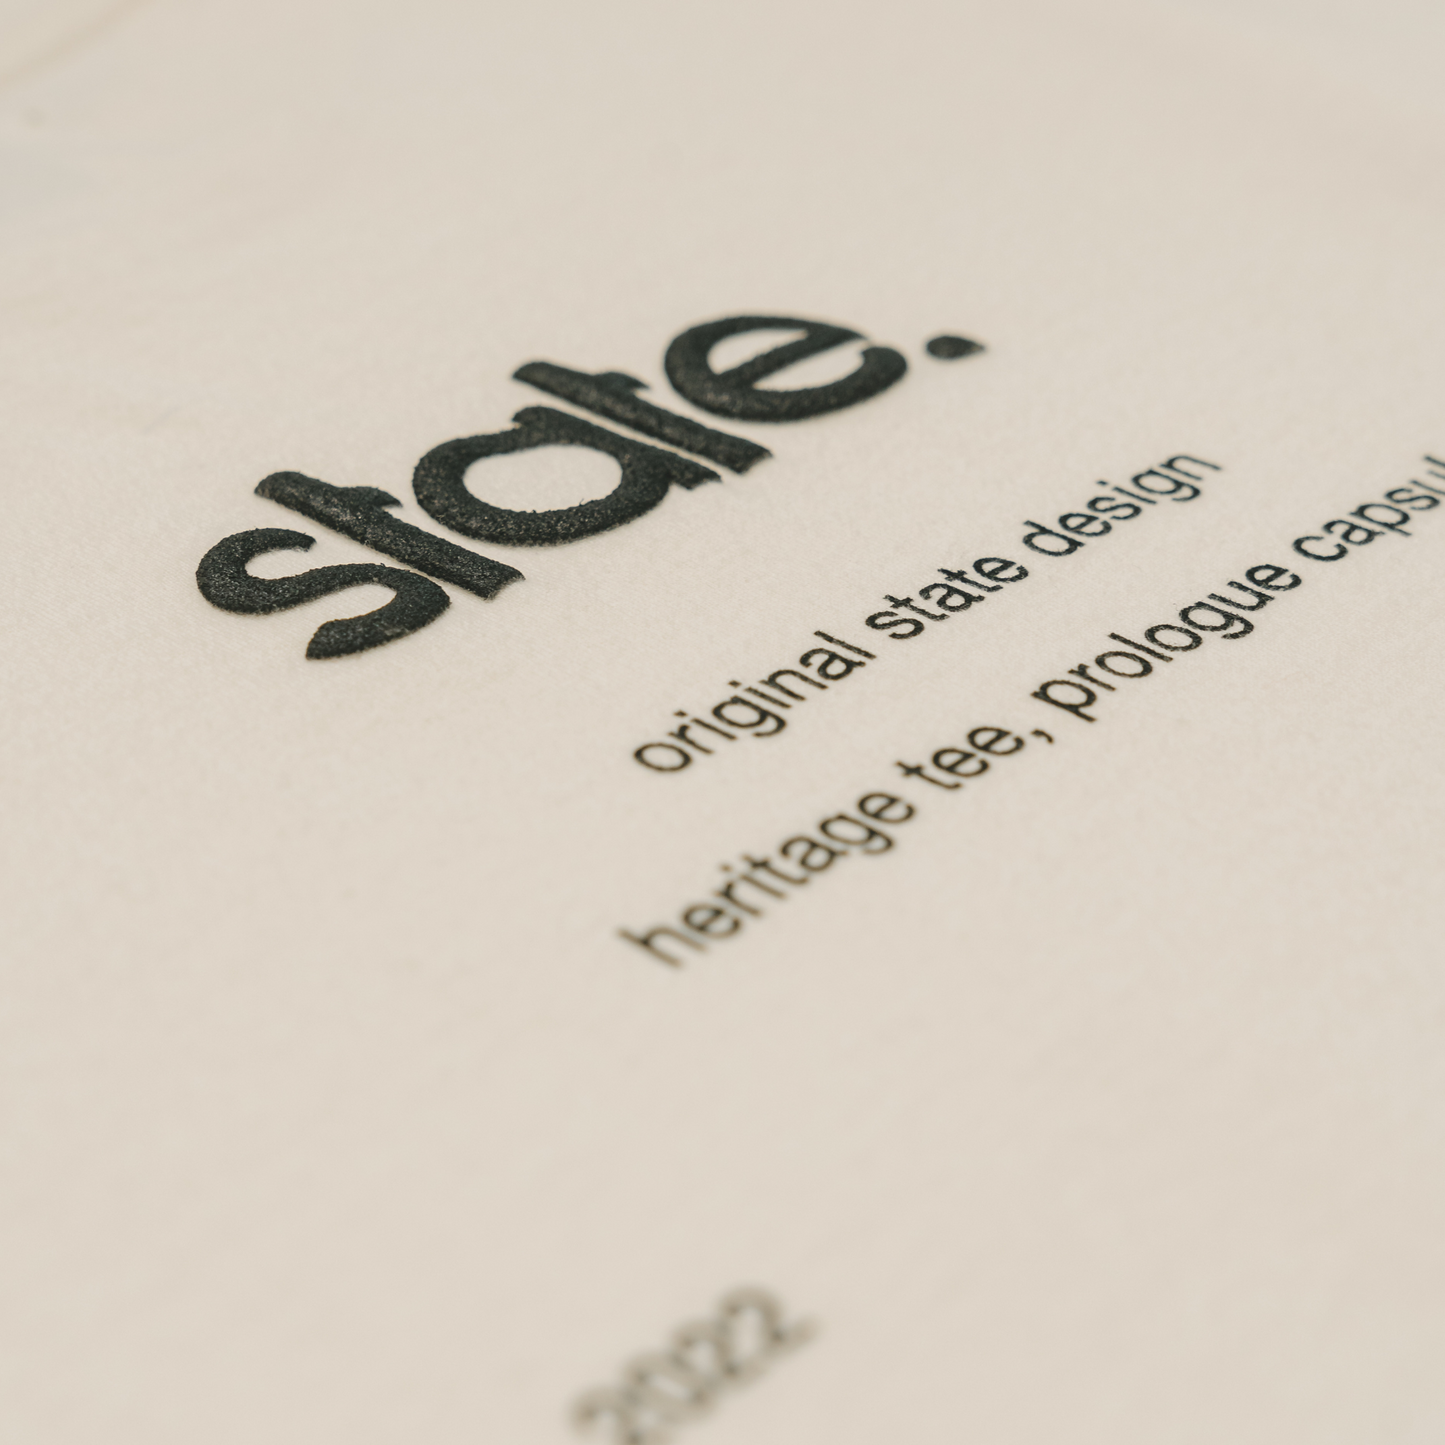 Load image into Gallery viewer, State Heritage Tee - Off White
